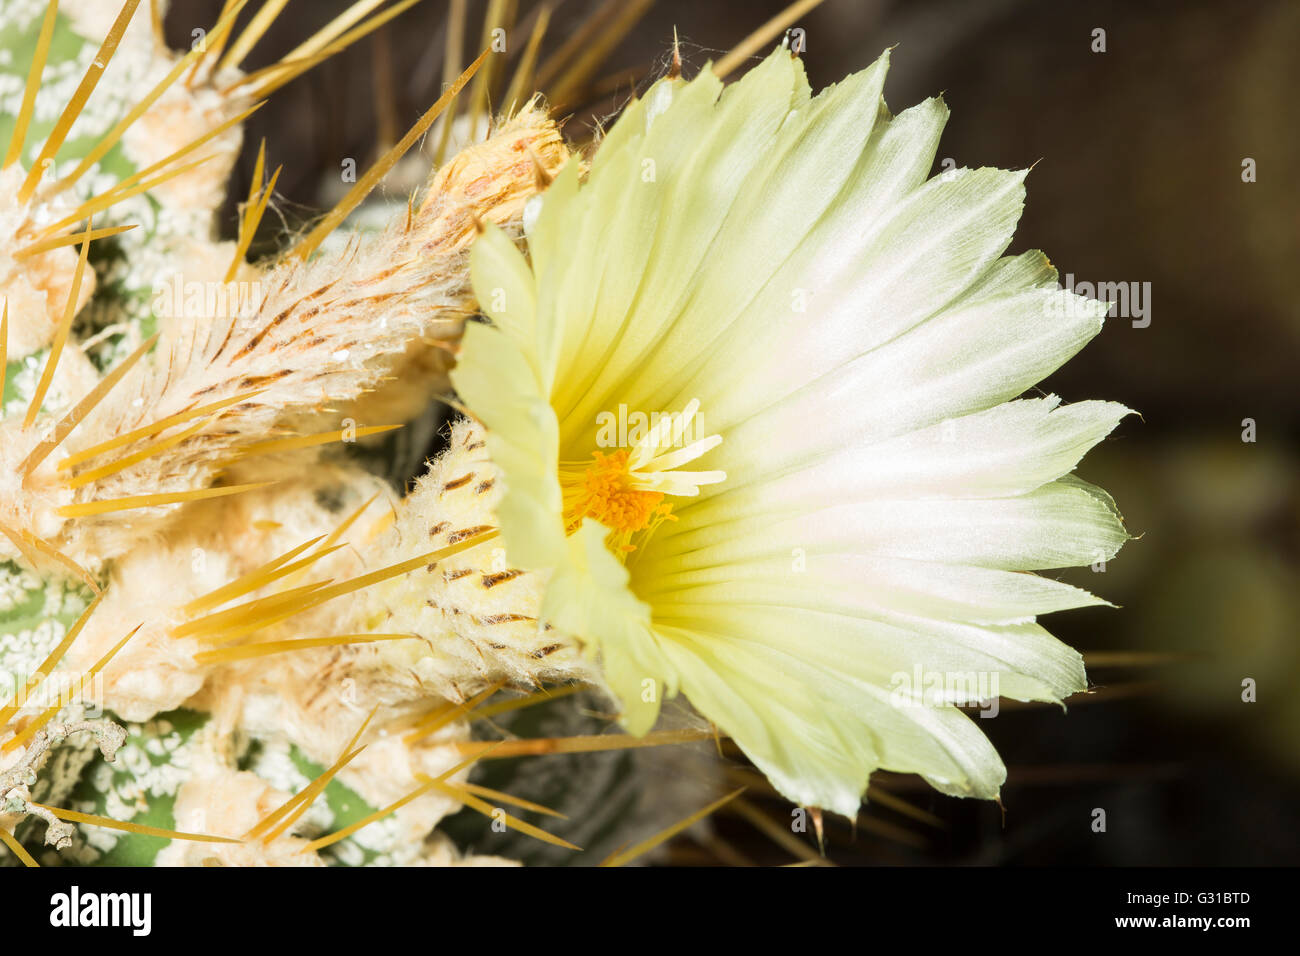 Bearing pale yellow flower of a Parodia magnifica succulent plant, Eriocactus magnificus, blossoming in summer Stock Photo